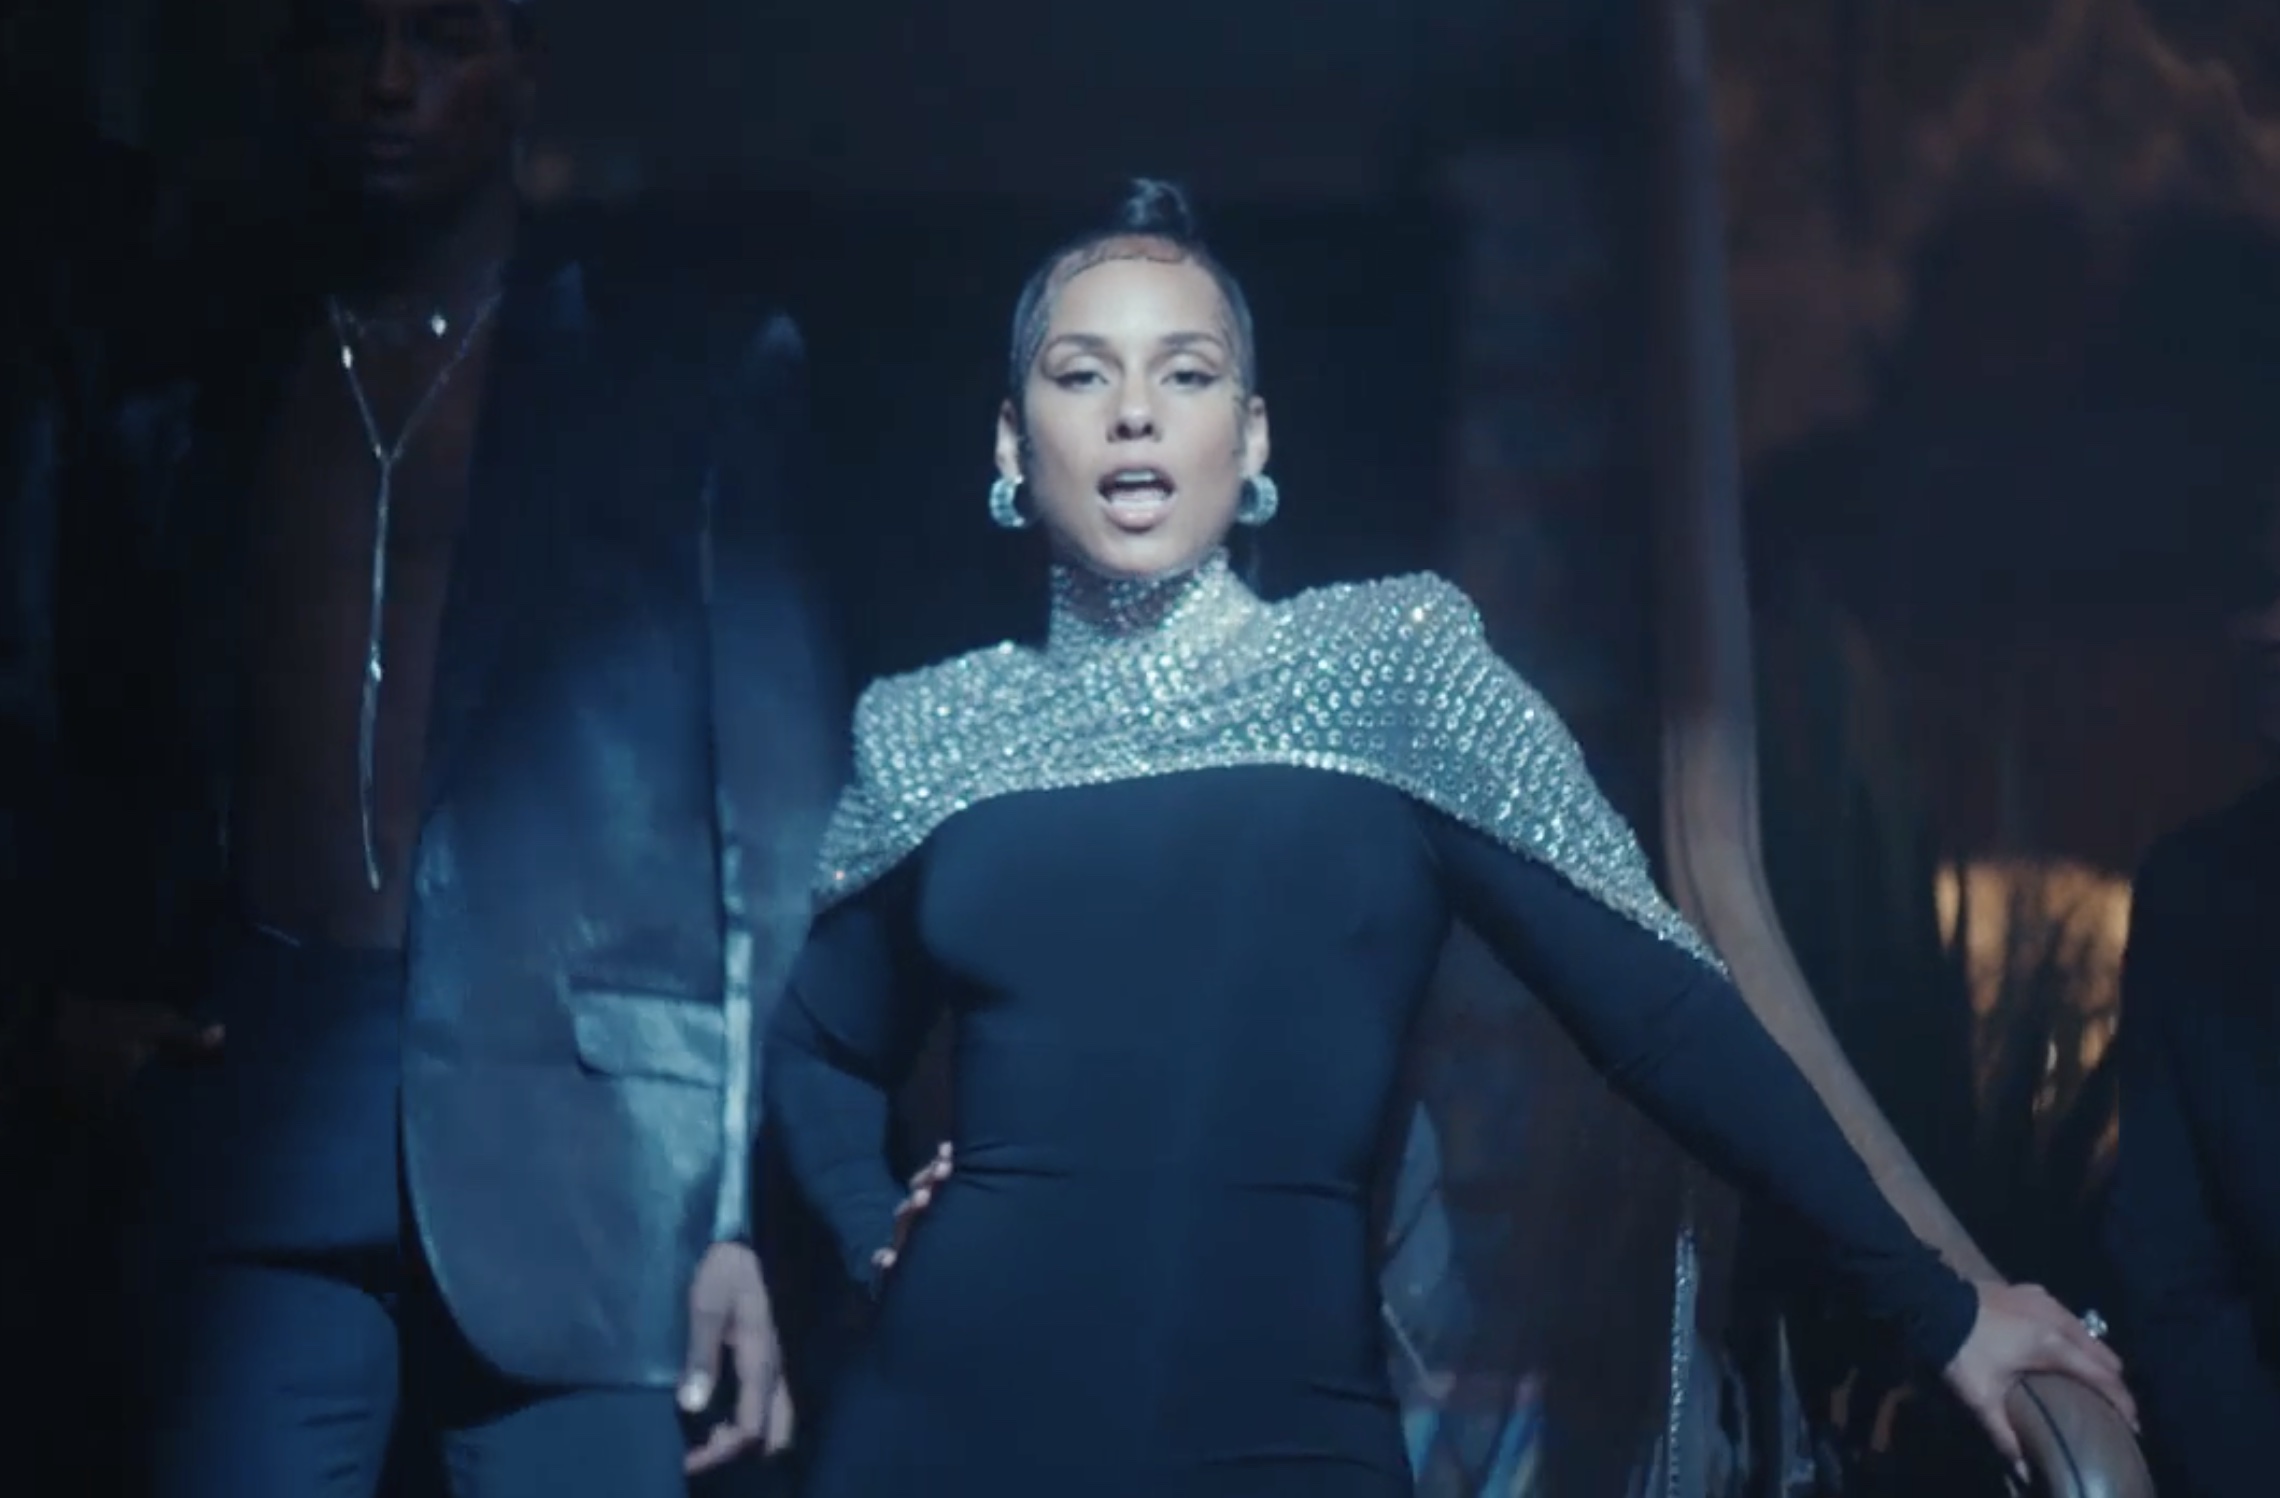 Watch Alicia Keys’ Star-Studded ‘LaLa’ Video With Swae Lee